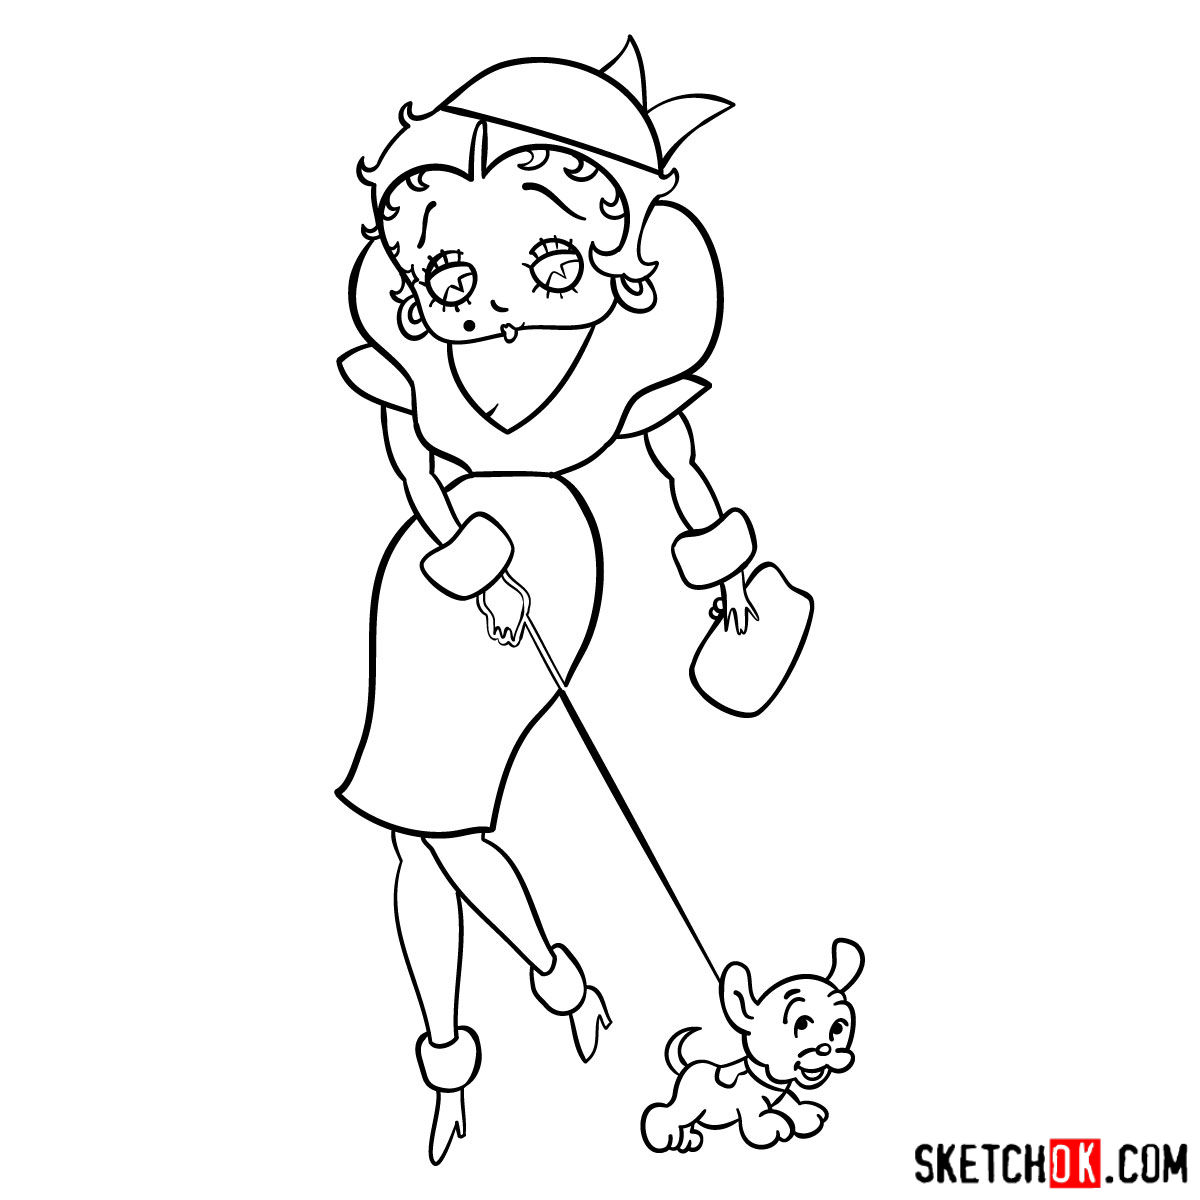 How to draw Betty Boop with her dog - step 17